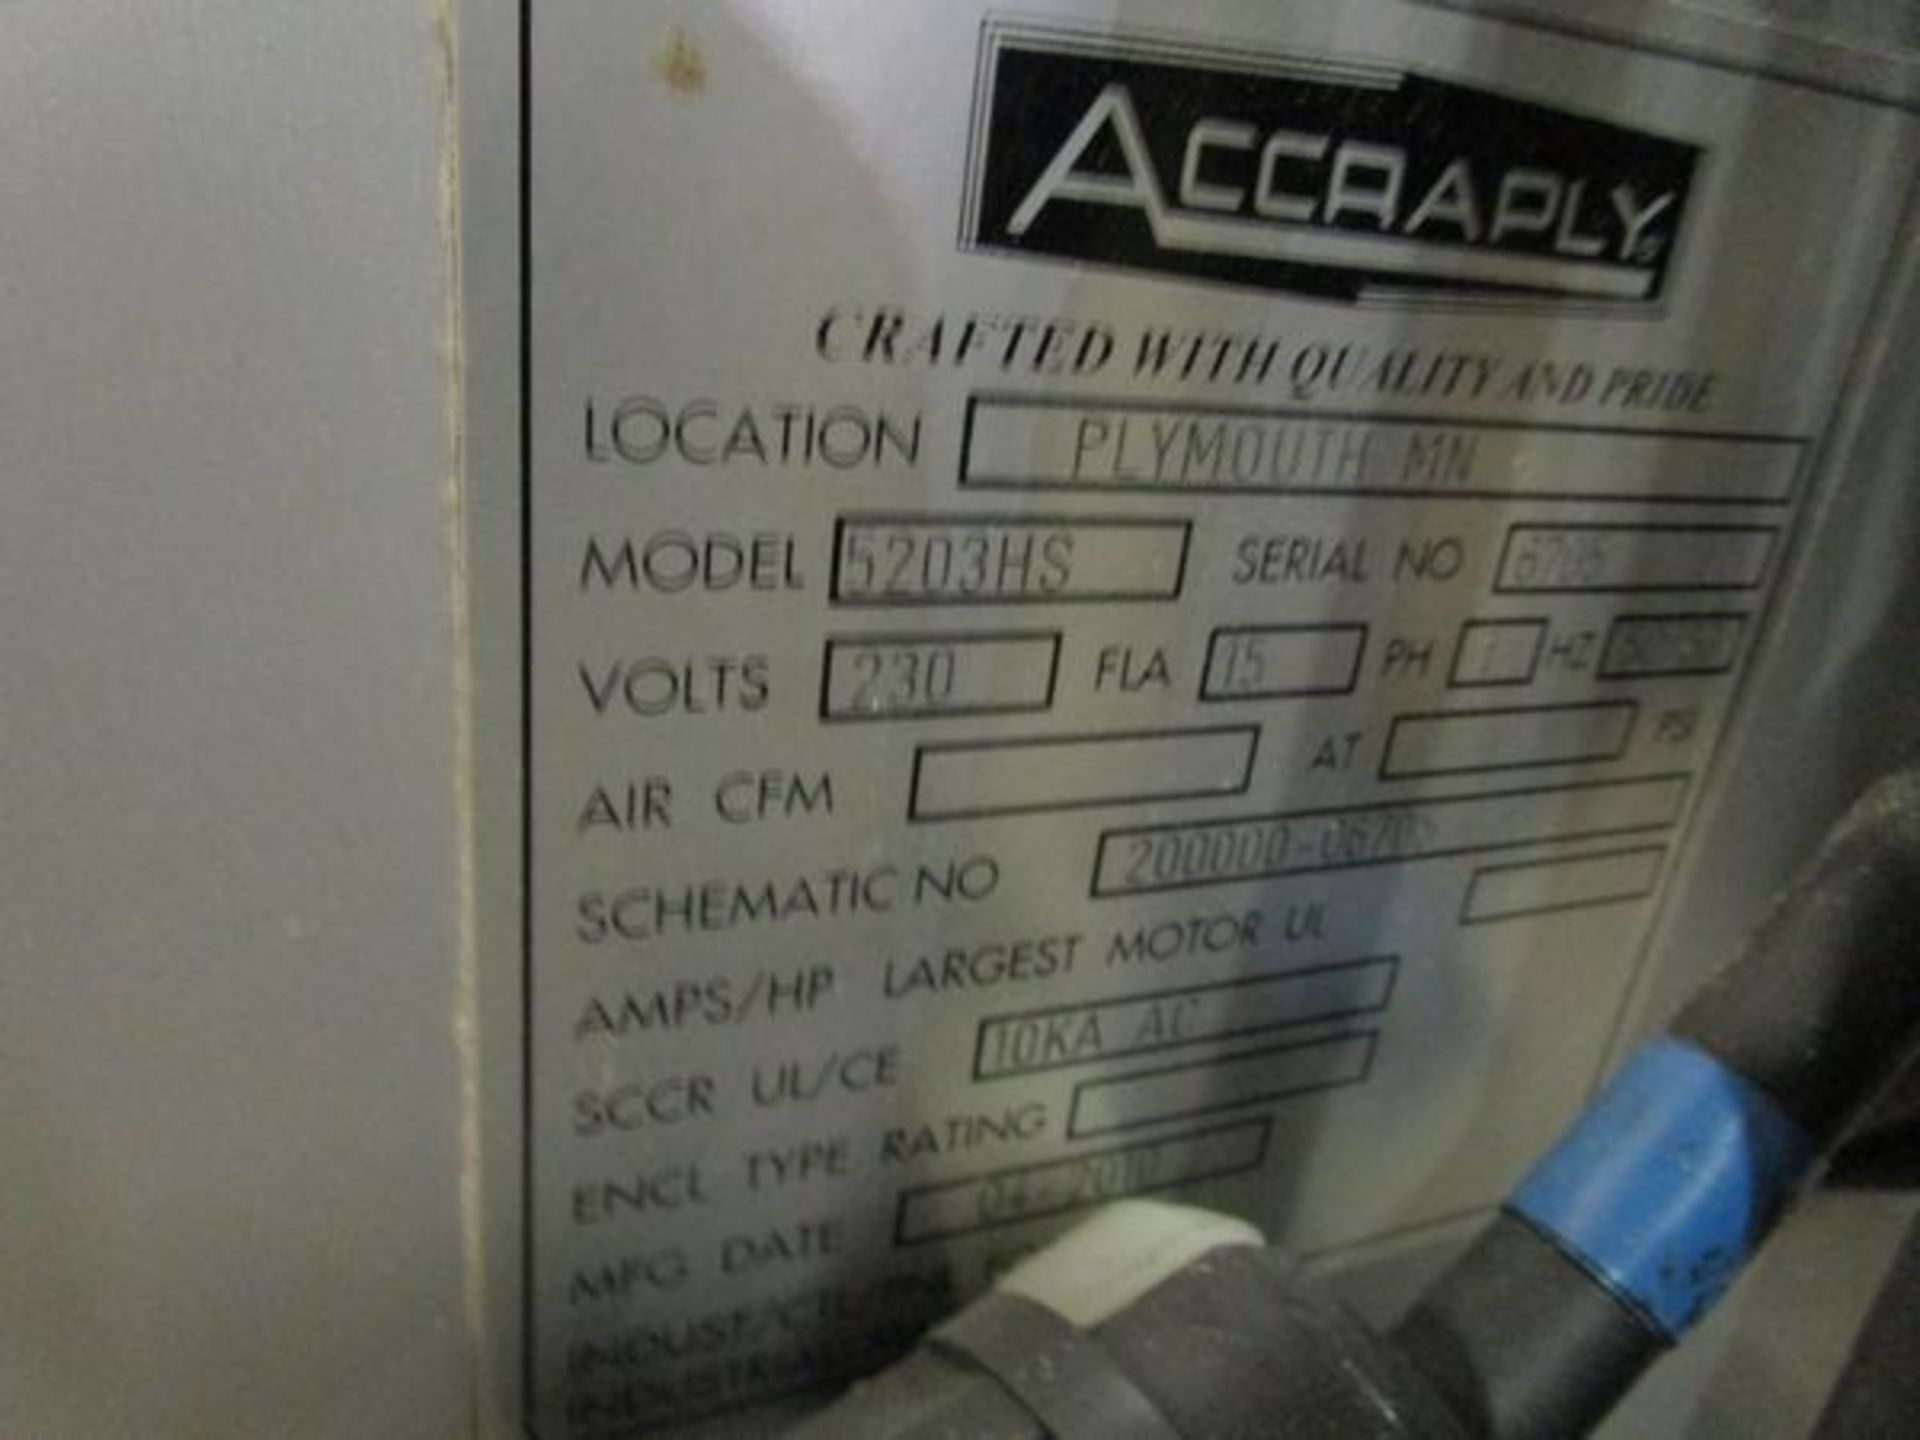 B-W Accraply Mod. 5203HS Label Applicator, s/n 6705, No Choppers - Image 4 of 6